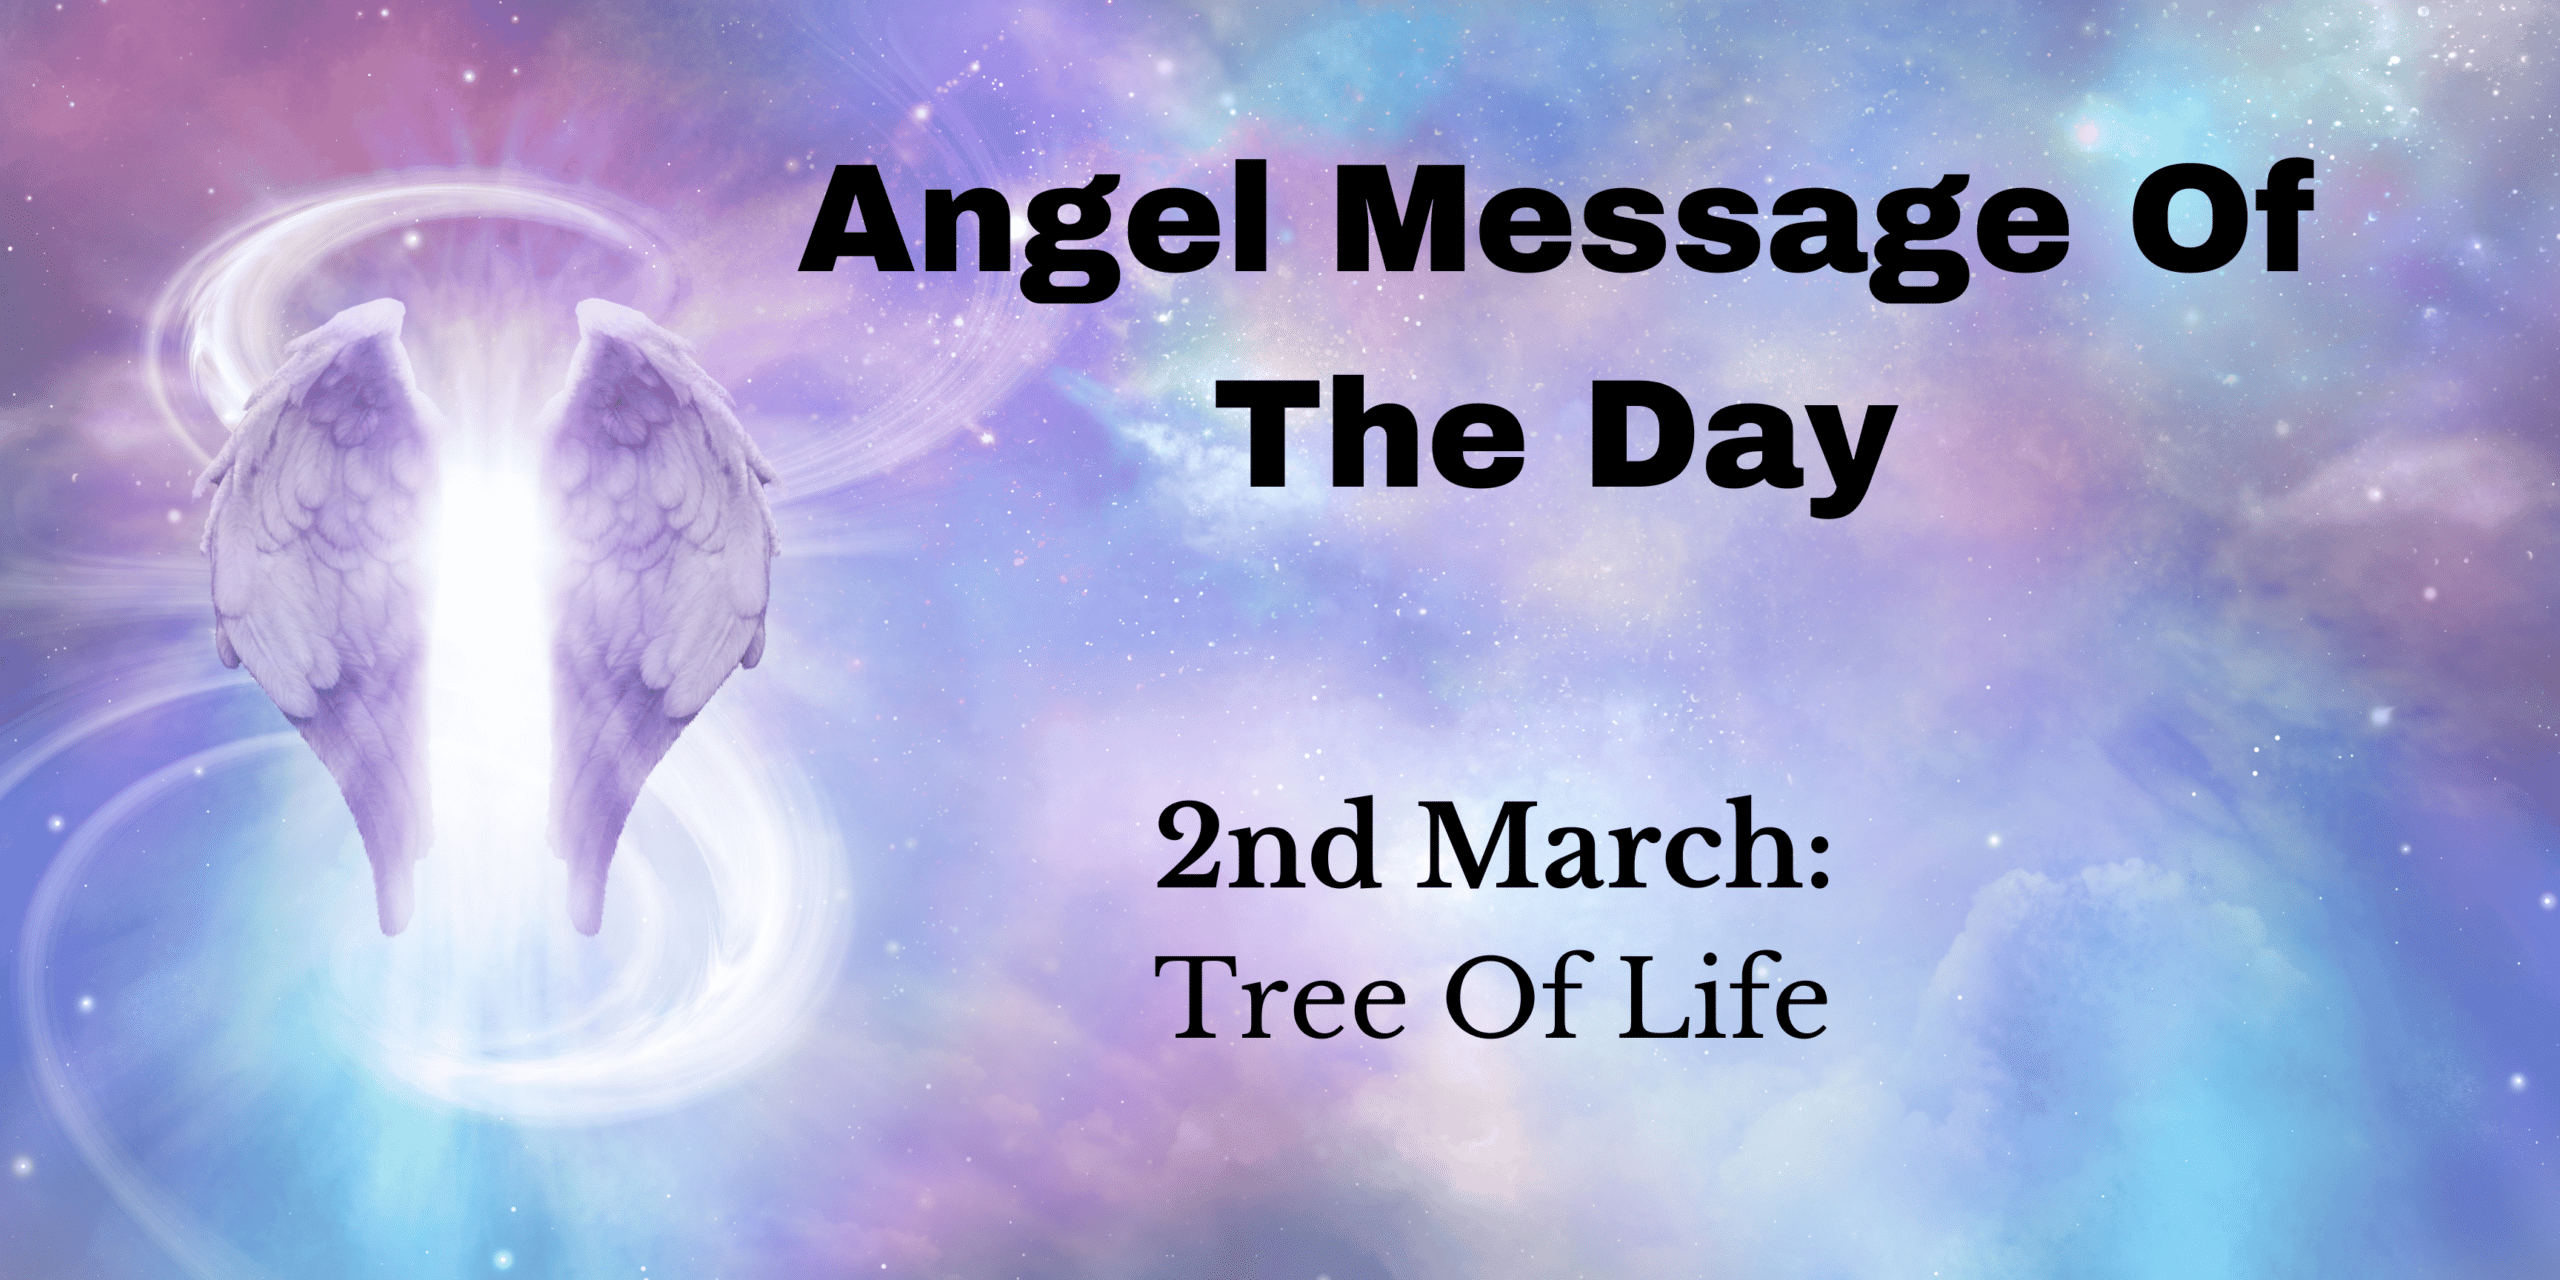 angel message of the day : tree of life